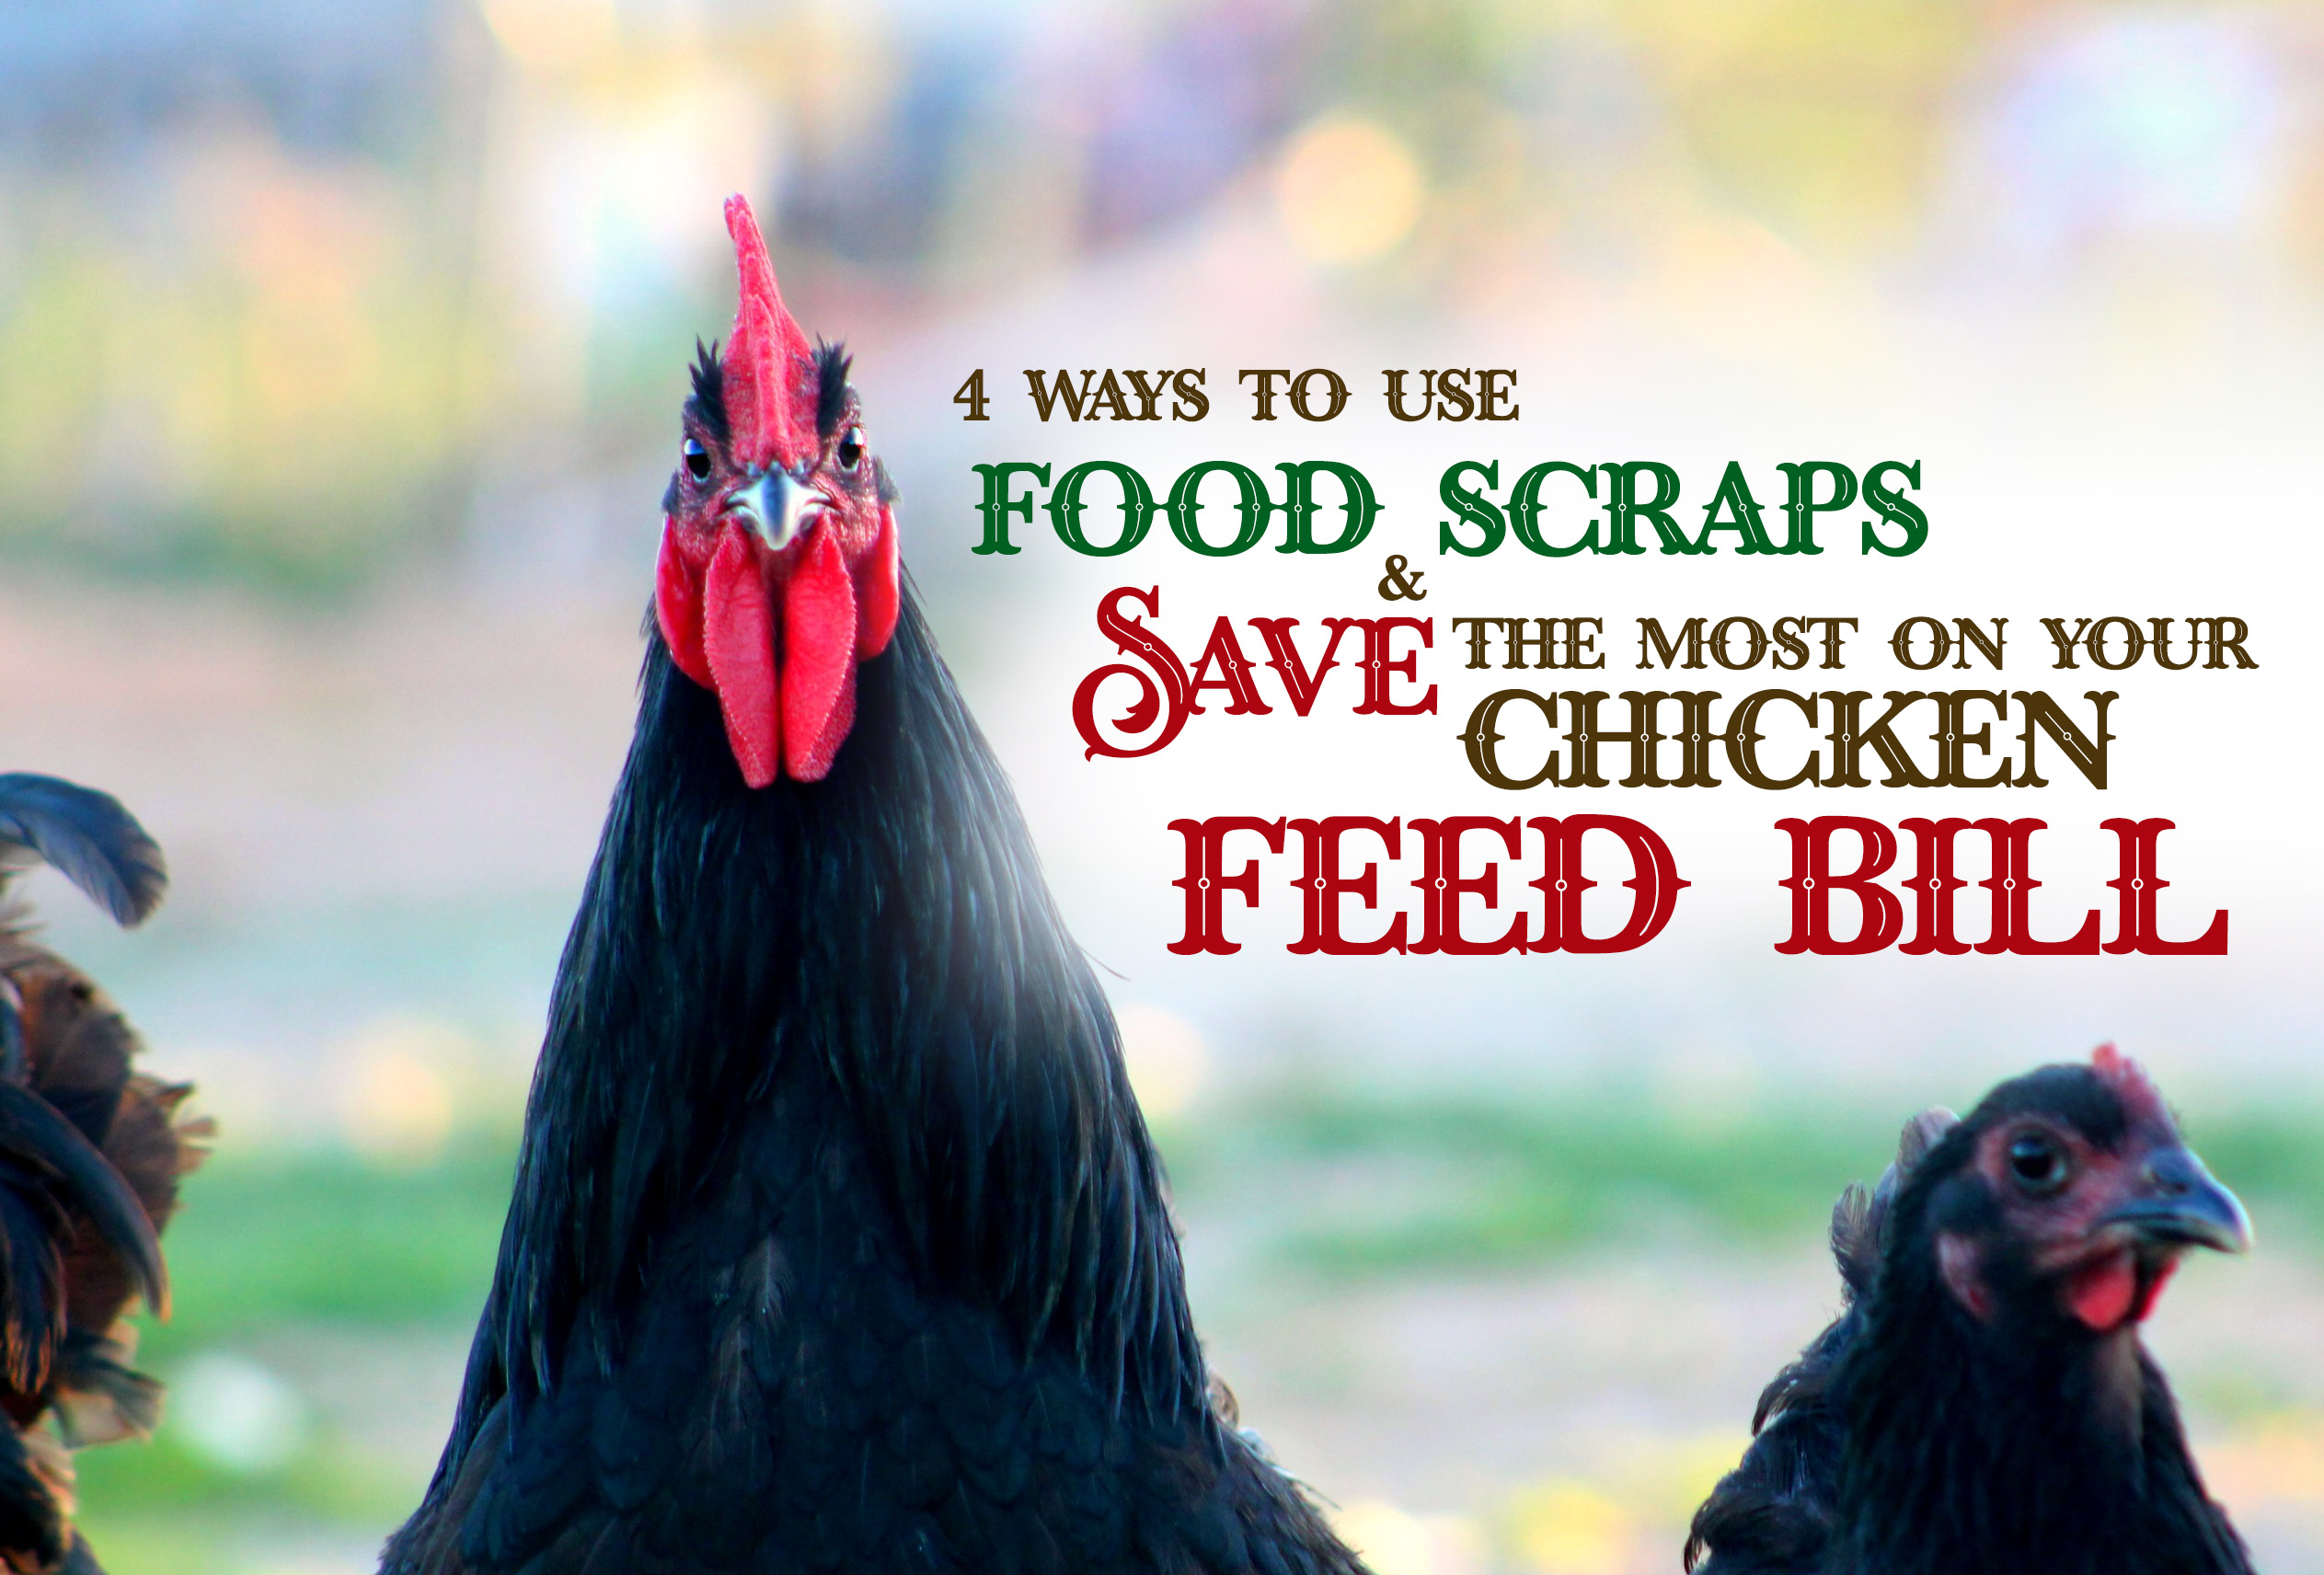 Learn how you can save more money on your chickens’ feed bill by feeding them your food scraps. Beyond the basic & holistic ways you can use your kitchen scraps. For those who like sustainable & DIY.